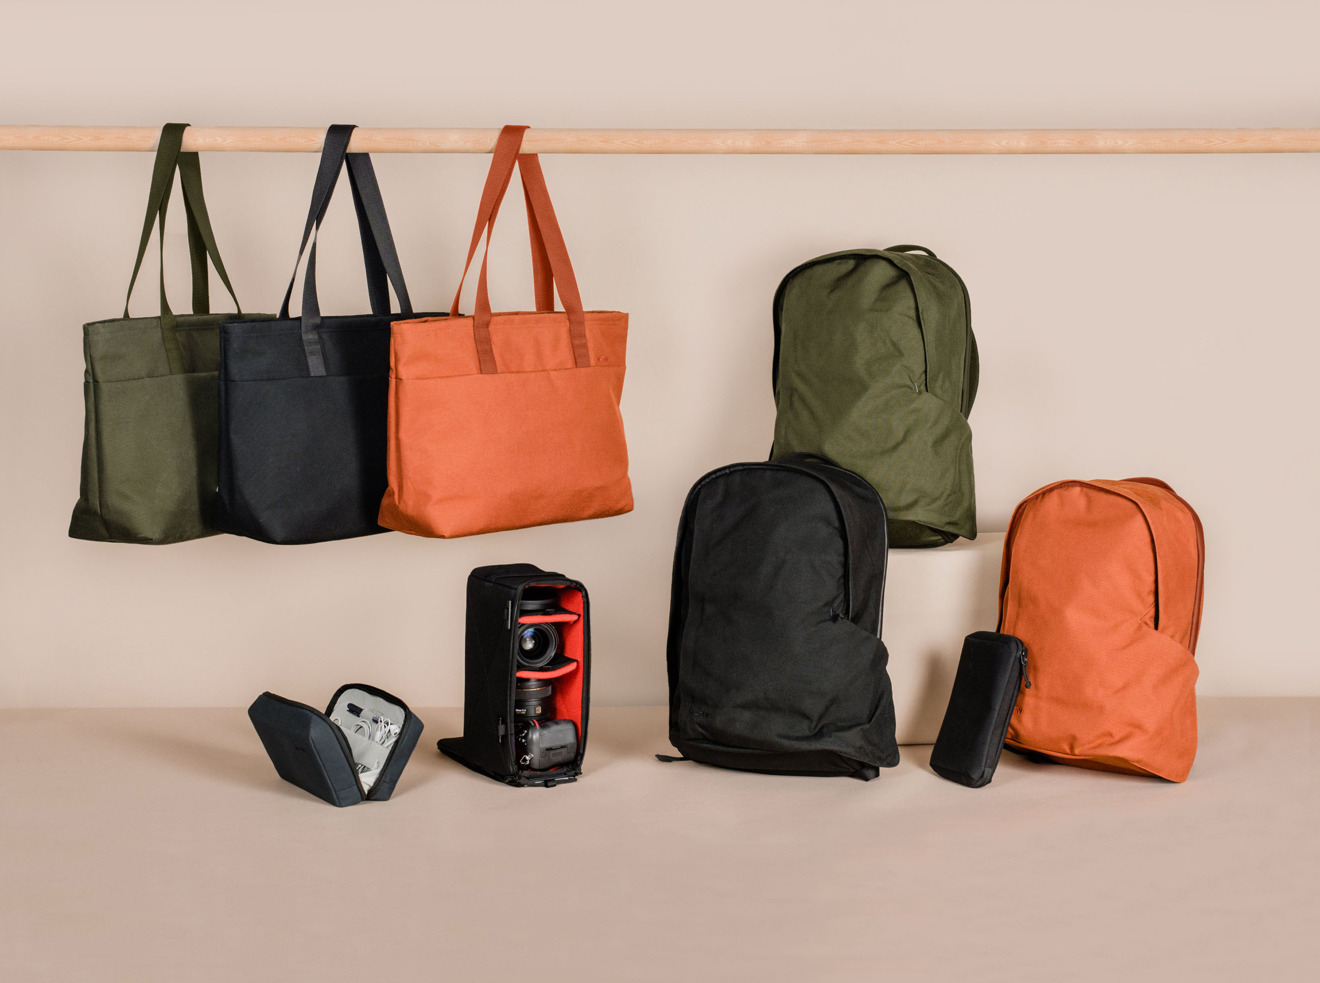 Moment launches new travel bag line and tech organizers | AppleInsider